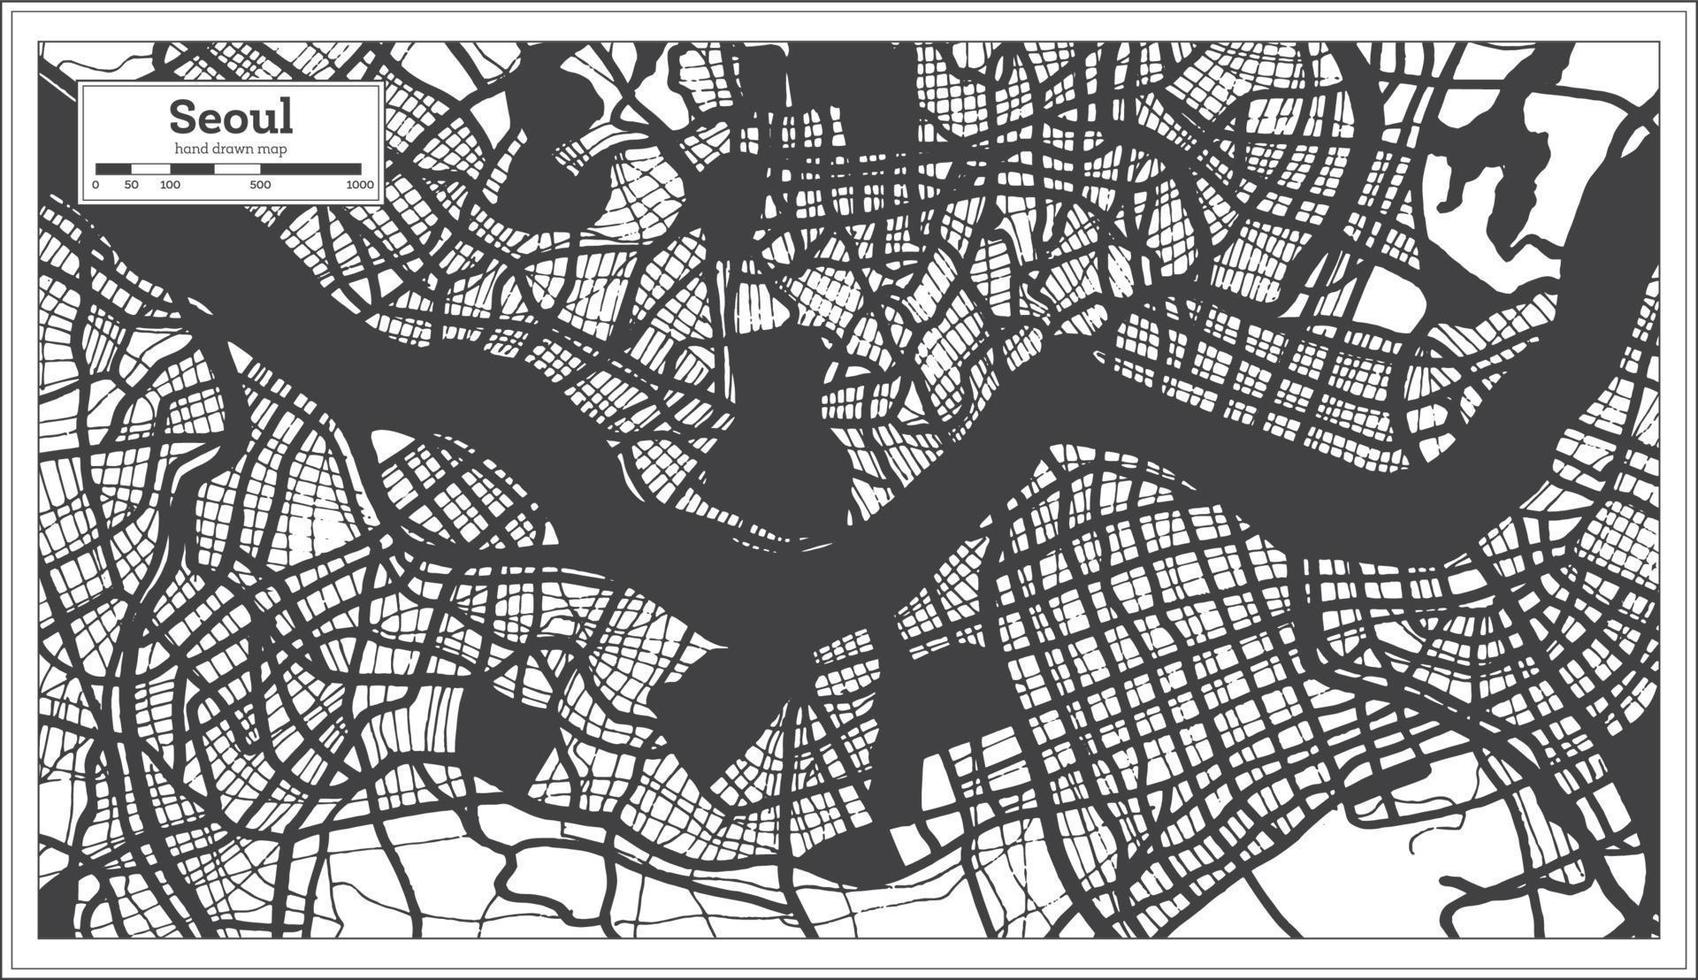 Seoul South Korea City Map in Black and White Color in Retro Style. vector